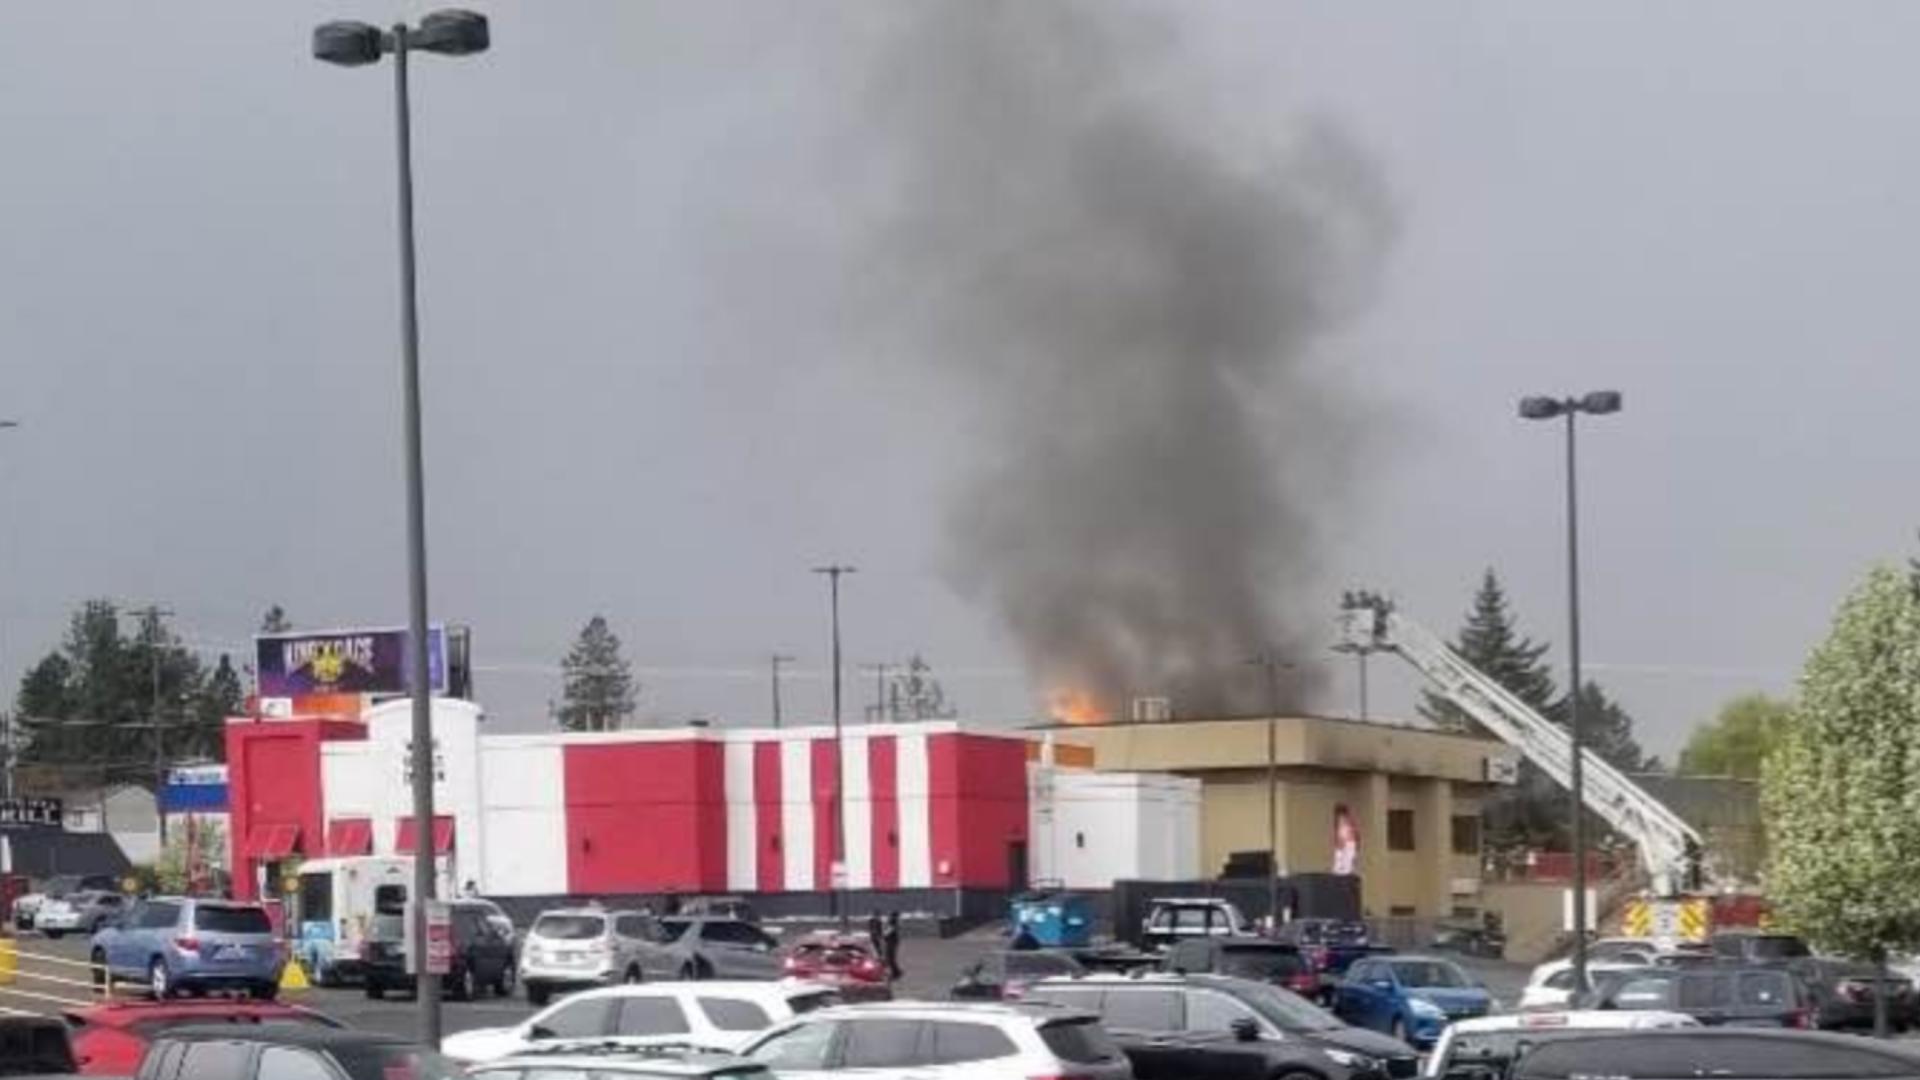 Bystanders took pictures of the blaze that is burning the U.S. Bank right near the KFC.